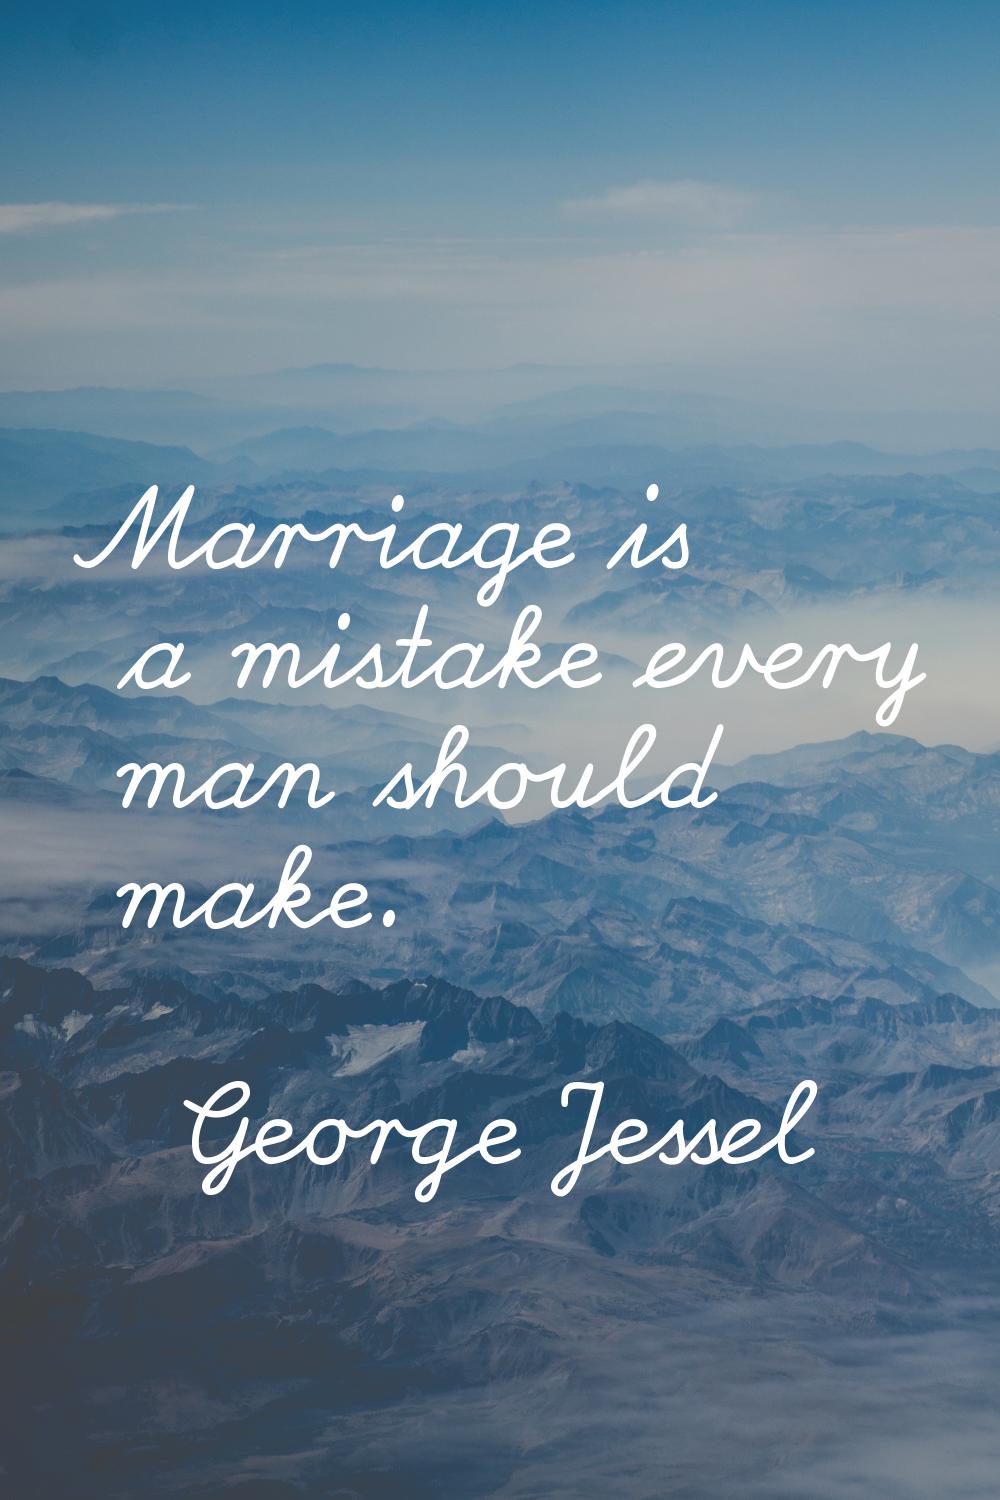 Marriage is a mistake every man should make.